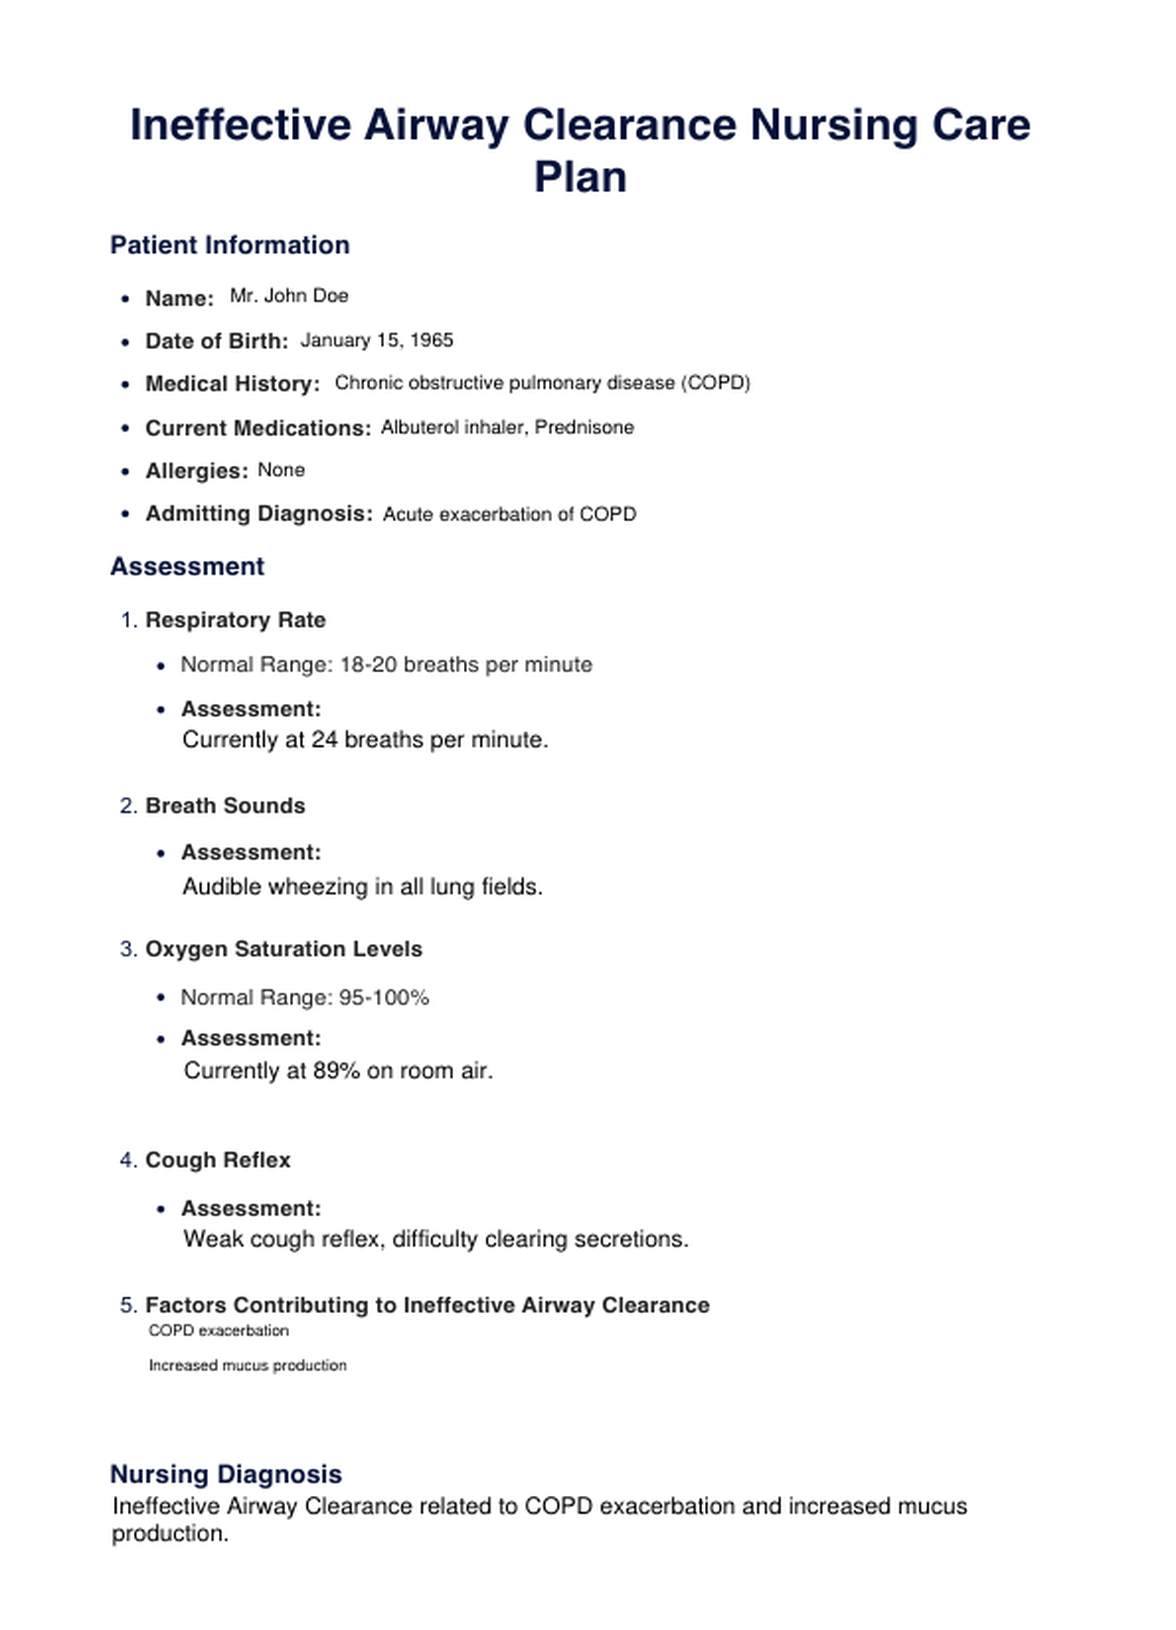 Ineffective Airway Clearance Nursing Care Plan PDF Example